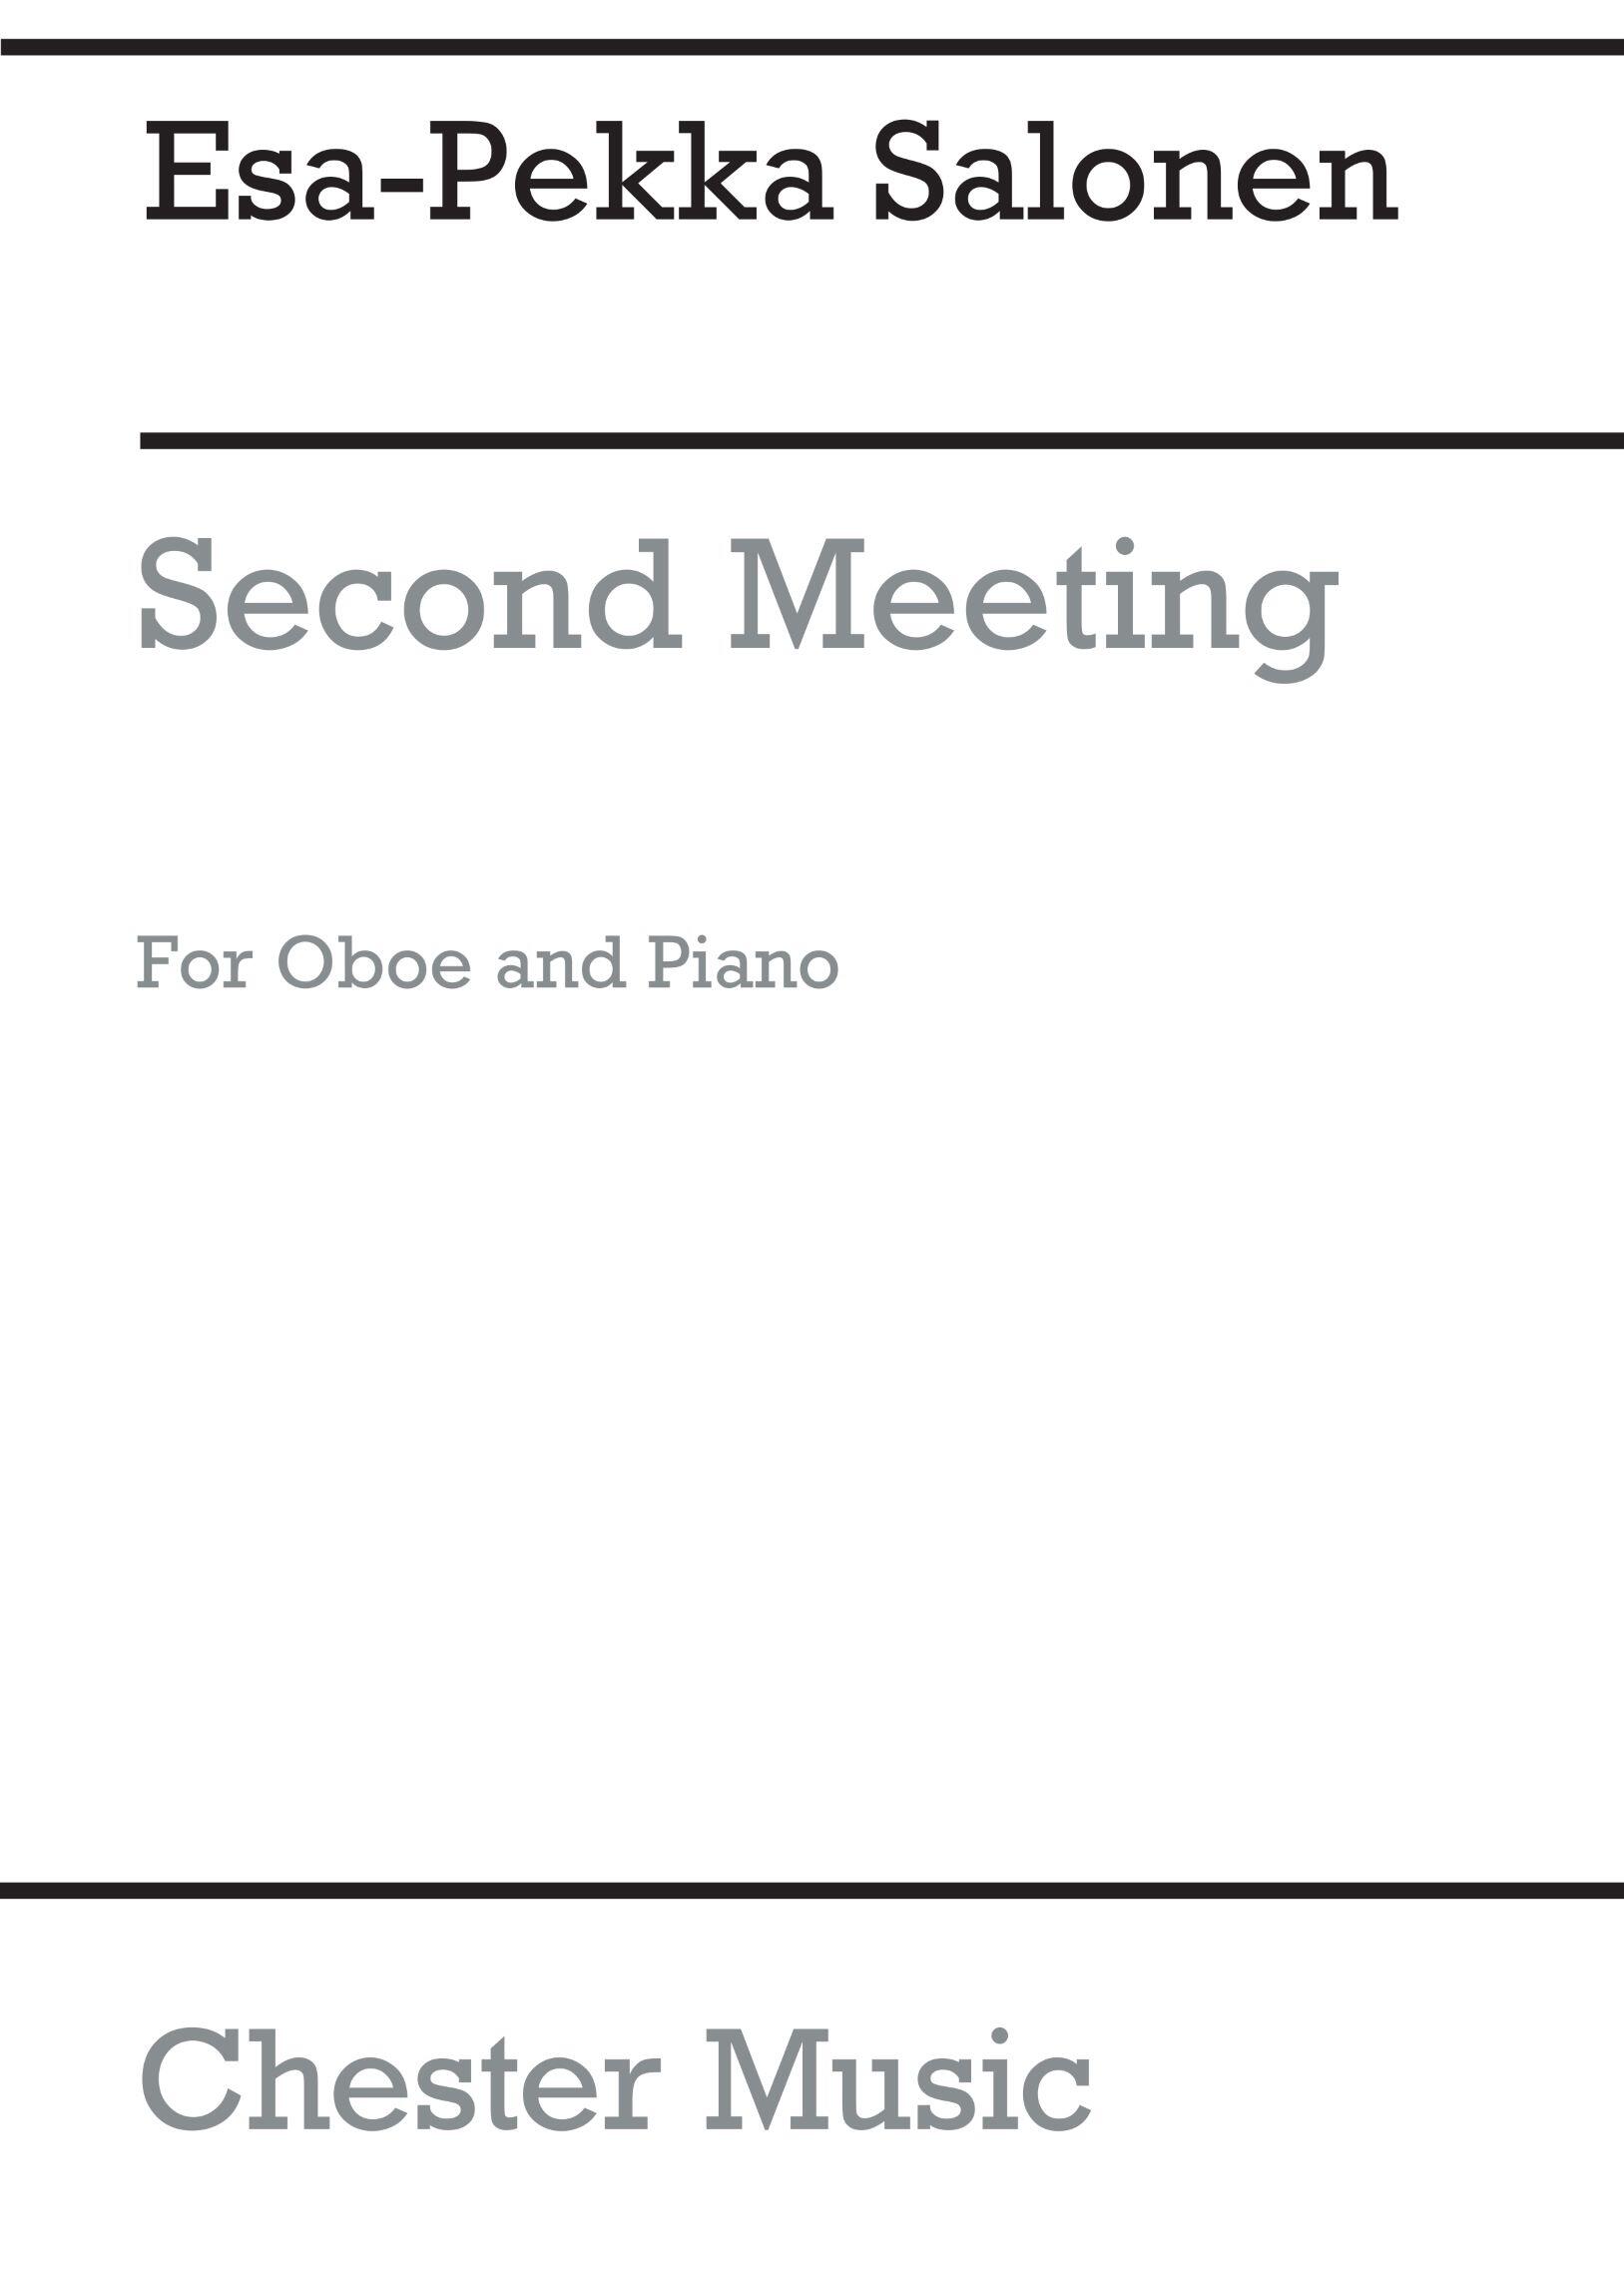 Second Meeting for Oboe and Piano : photo 1